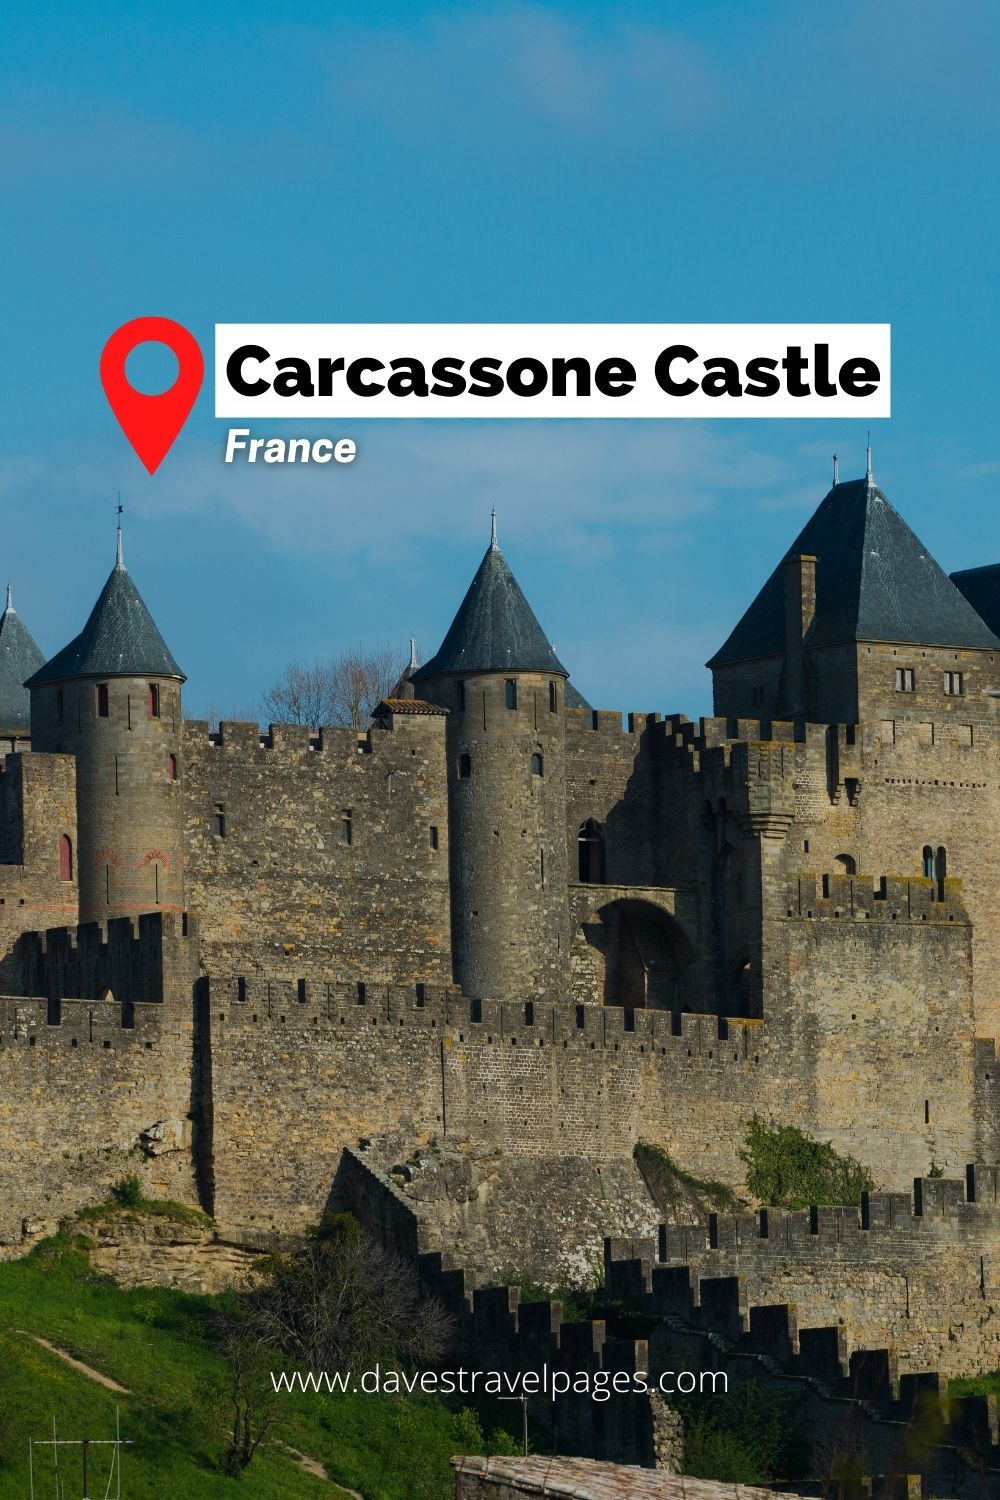 Important places in Europe: Carcassone Castle